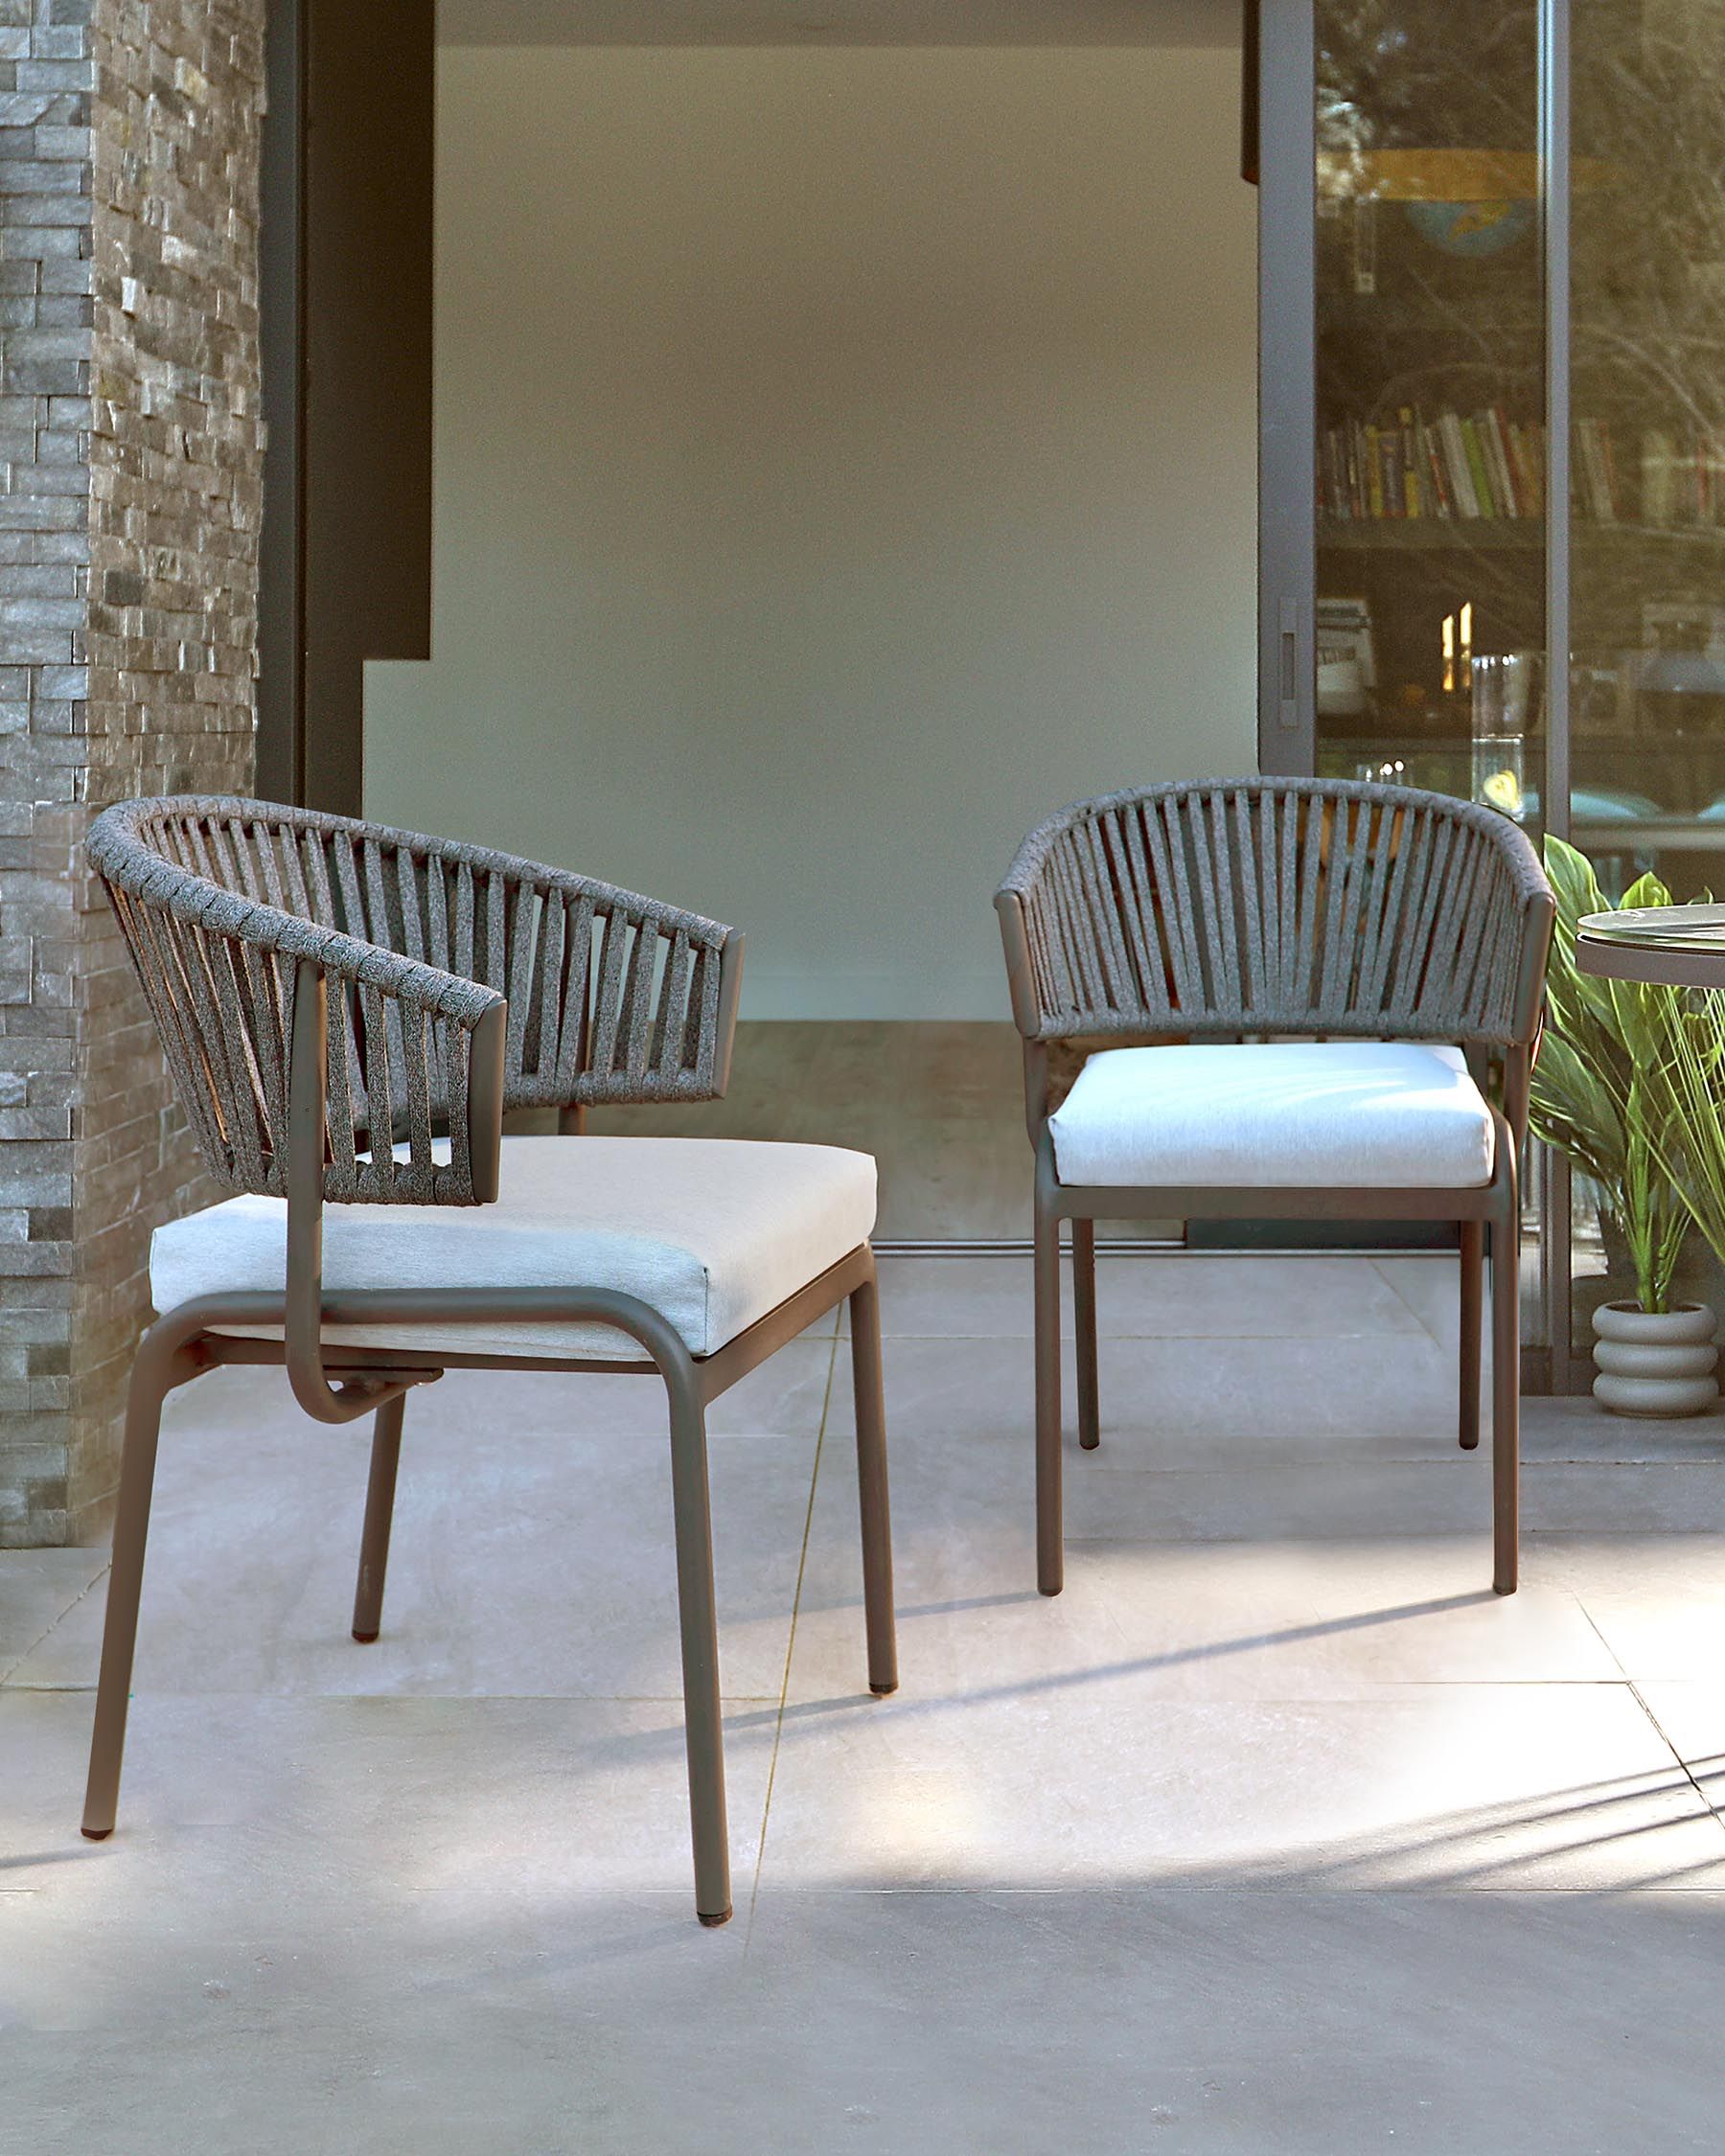 Patio Chairs: Relaxing in Style in Your Outdoor Space